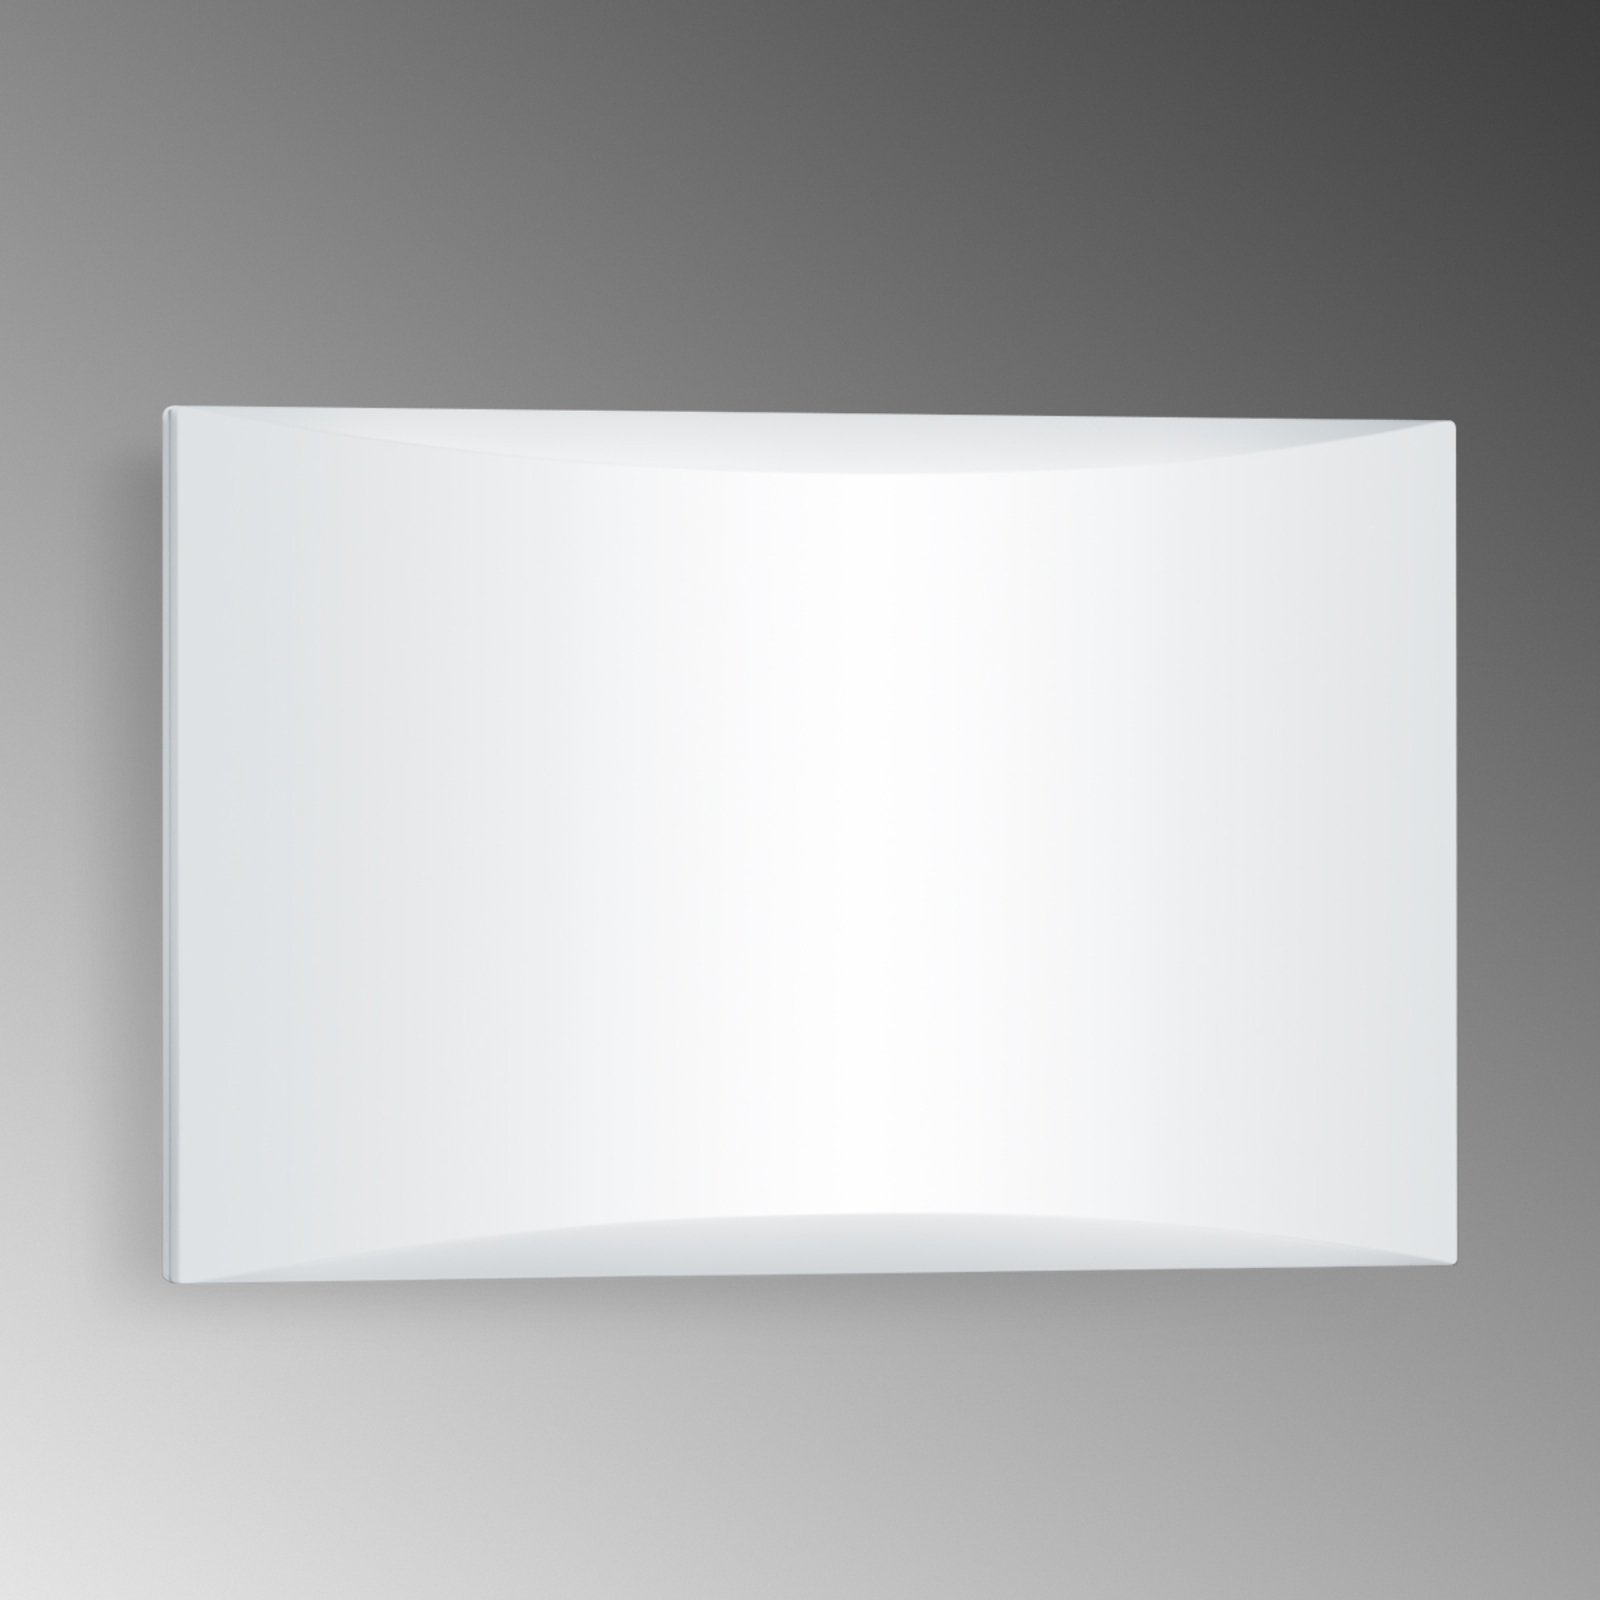 STEINEL L 1 N LED house number wall light IP54